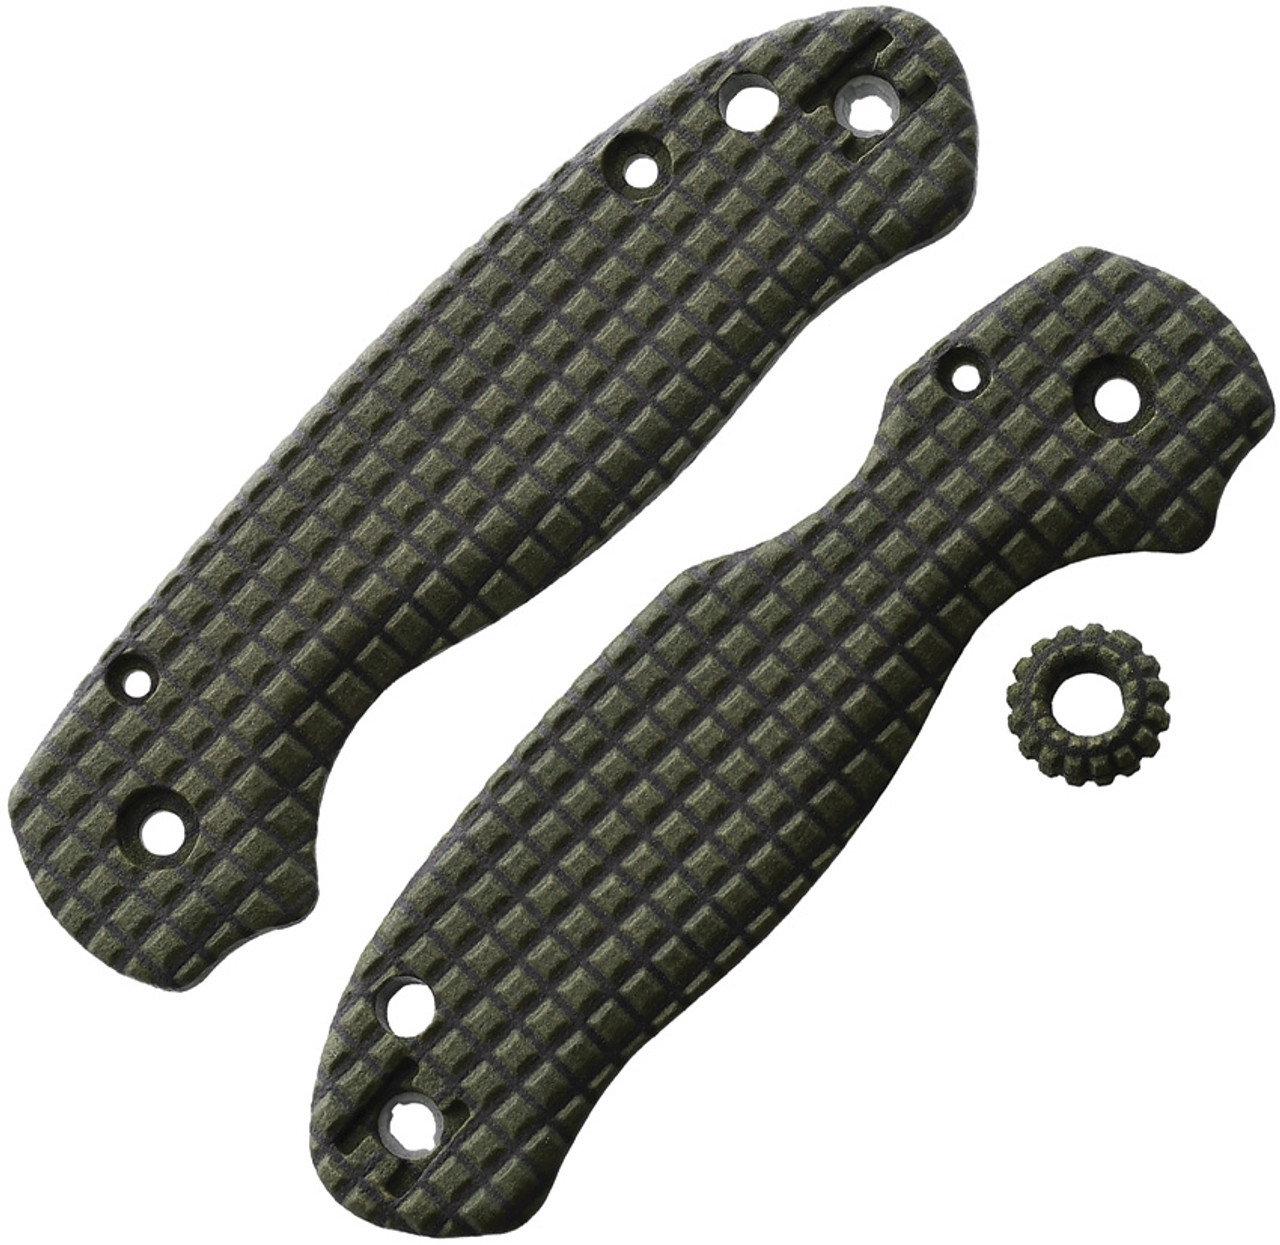 Chroma Scales Frag (CHR10023008) Textured Nylon PA12 Construction - Made for Spyderco Para Military 3 - Matching Bead Included